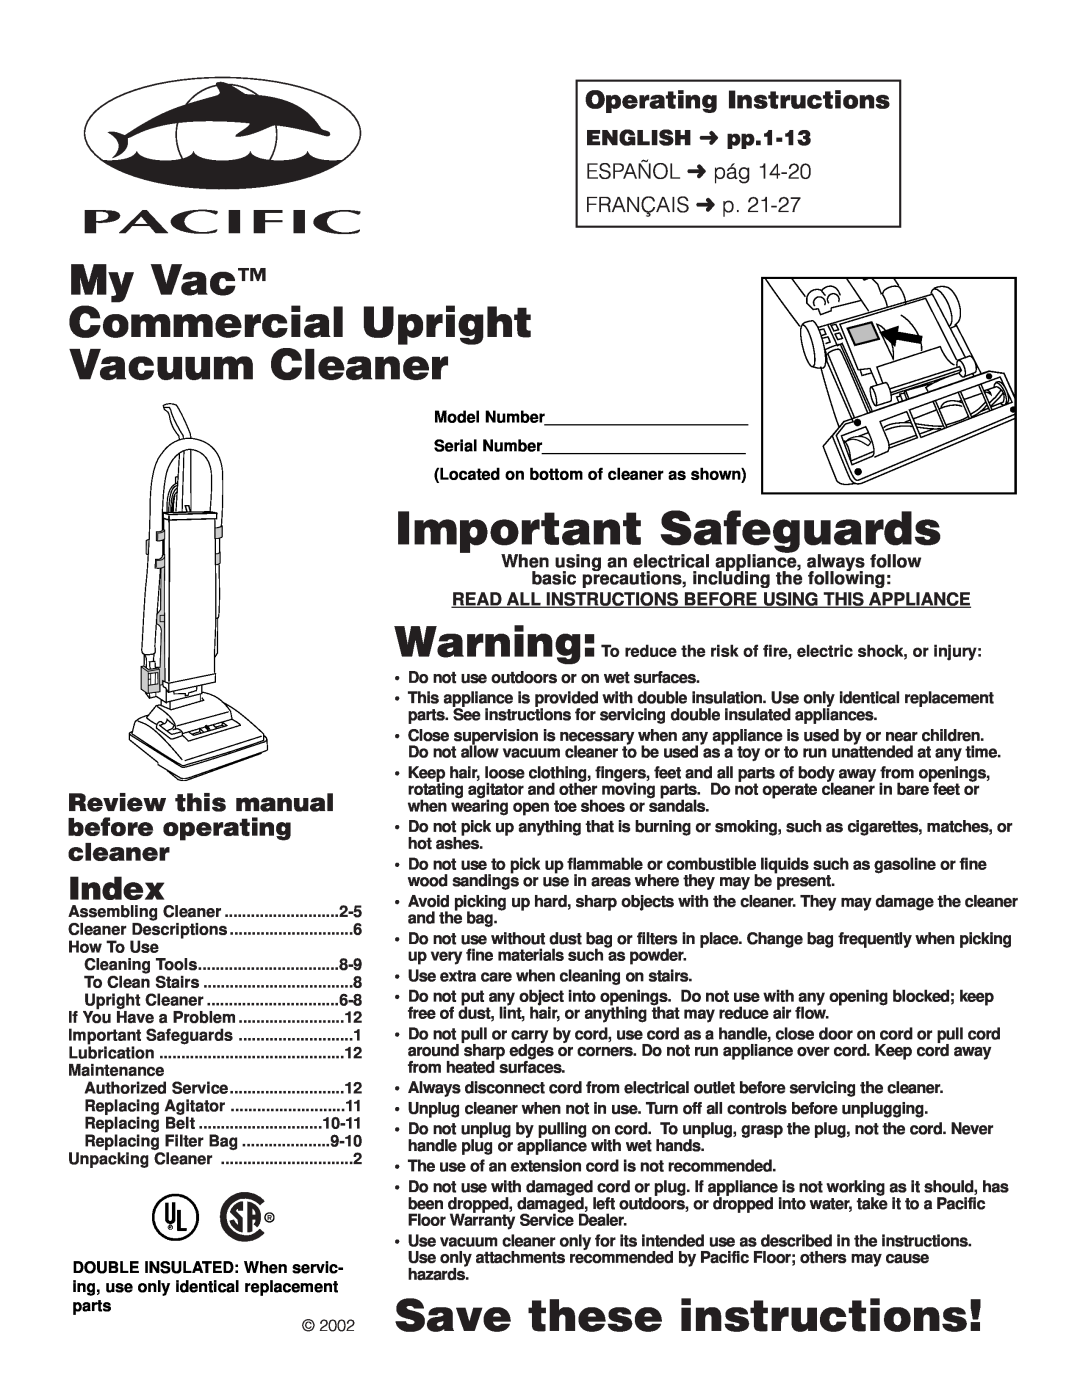 Pacific Digital Upright Vacuum Cleaner warranty Index, Operating Instructions, Review this manual before operating cleaner 